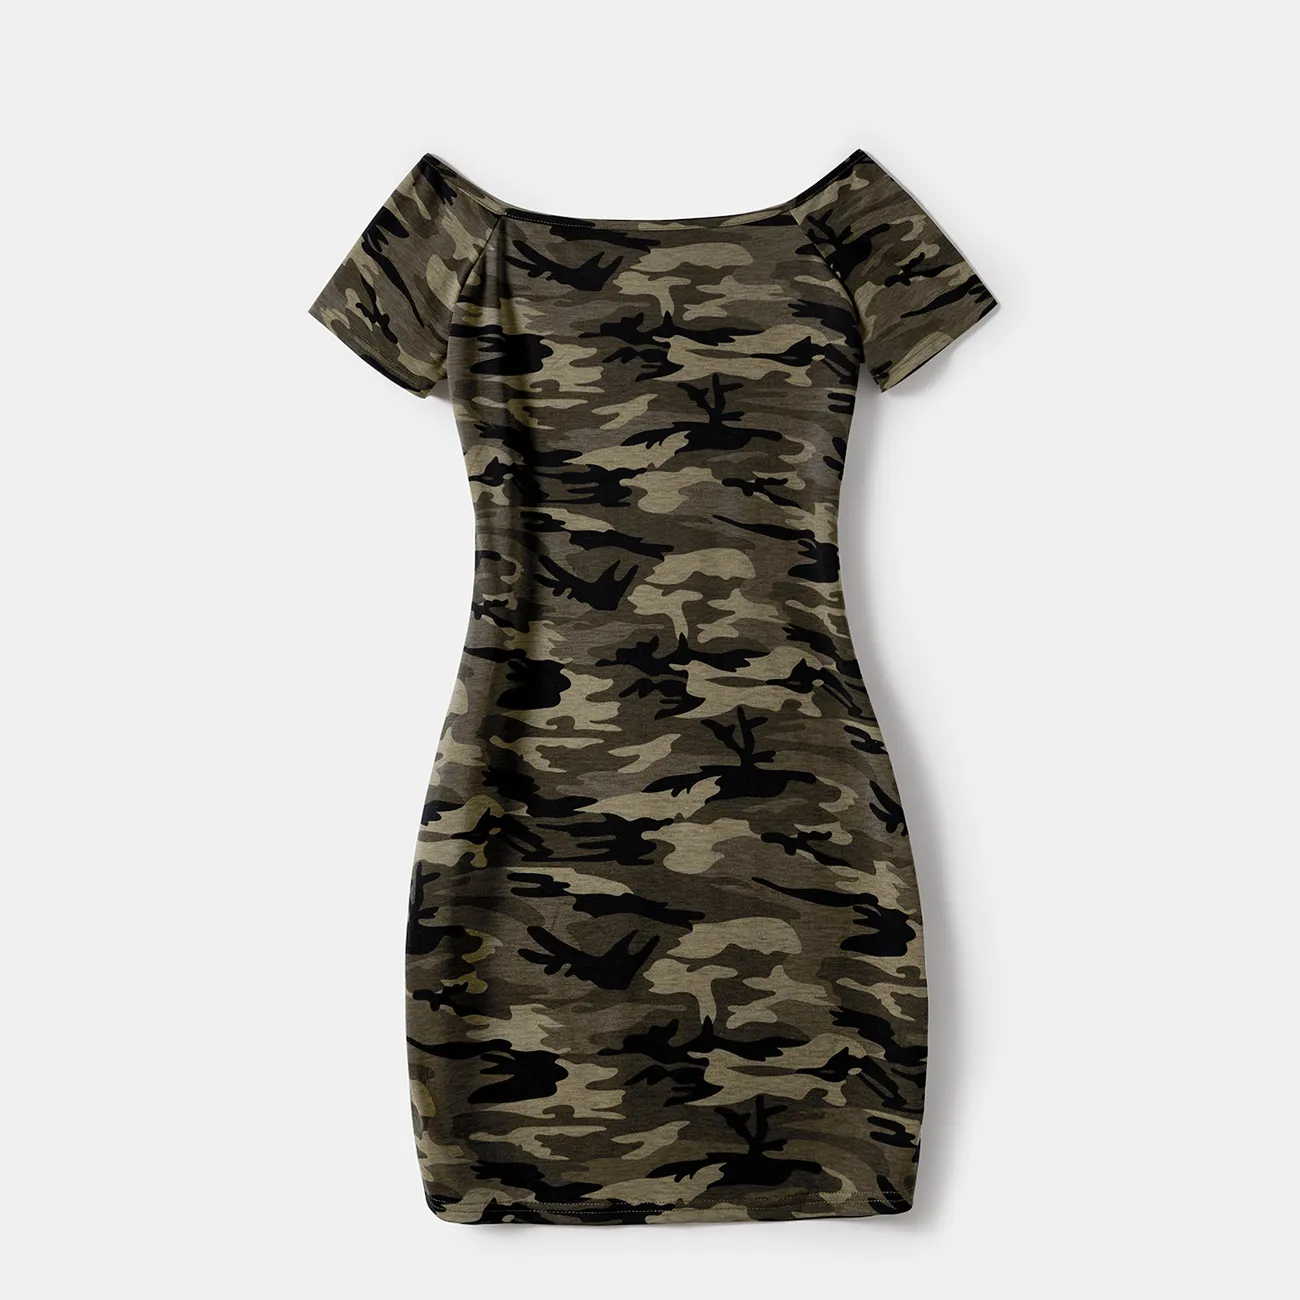 Family Matching Camouflage Tunic Dresses and Patch Pocket T-shirts Sets Army green big image 1